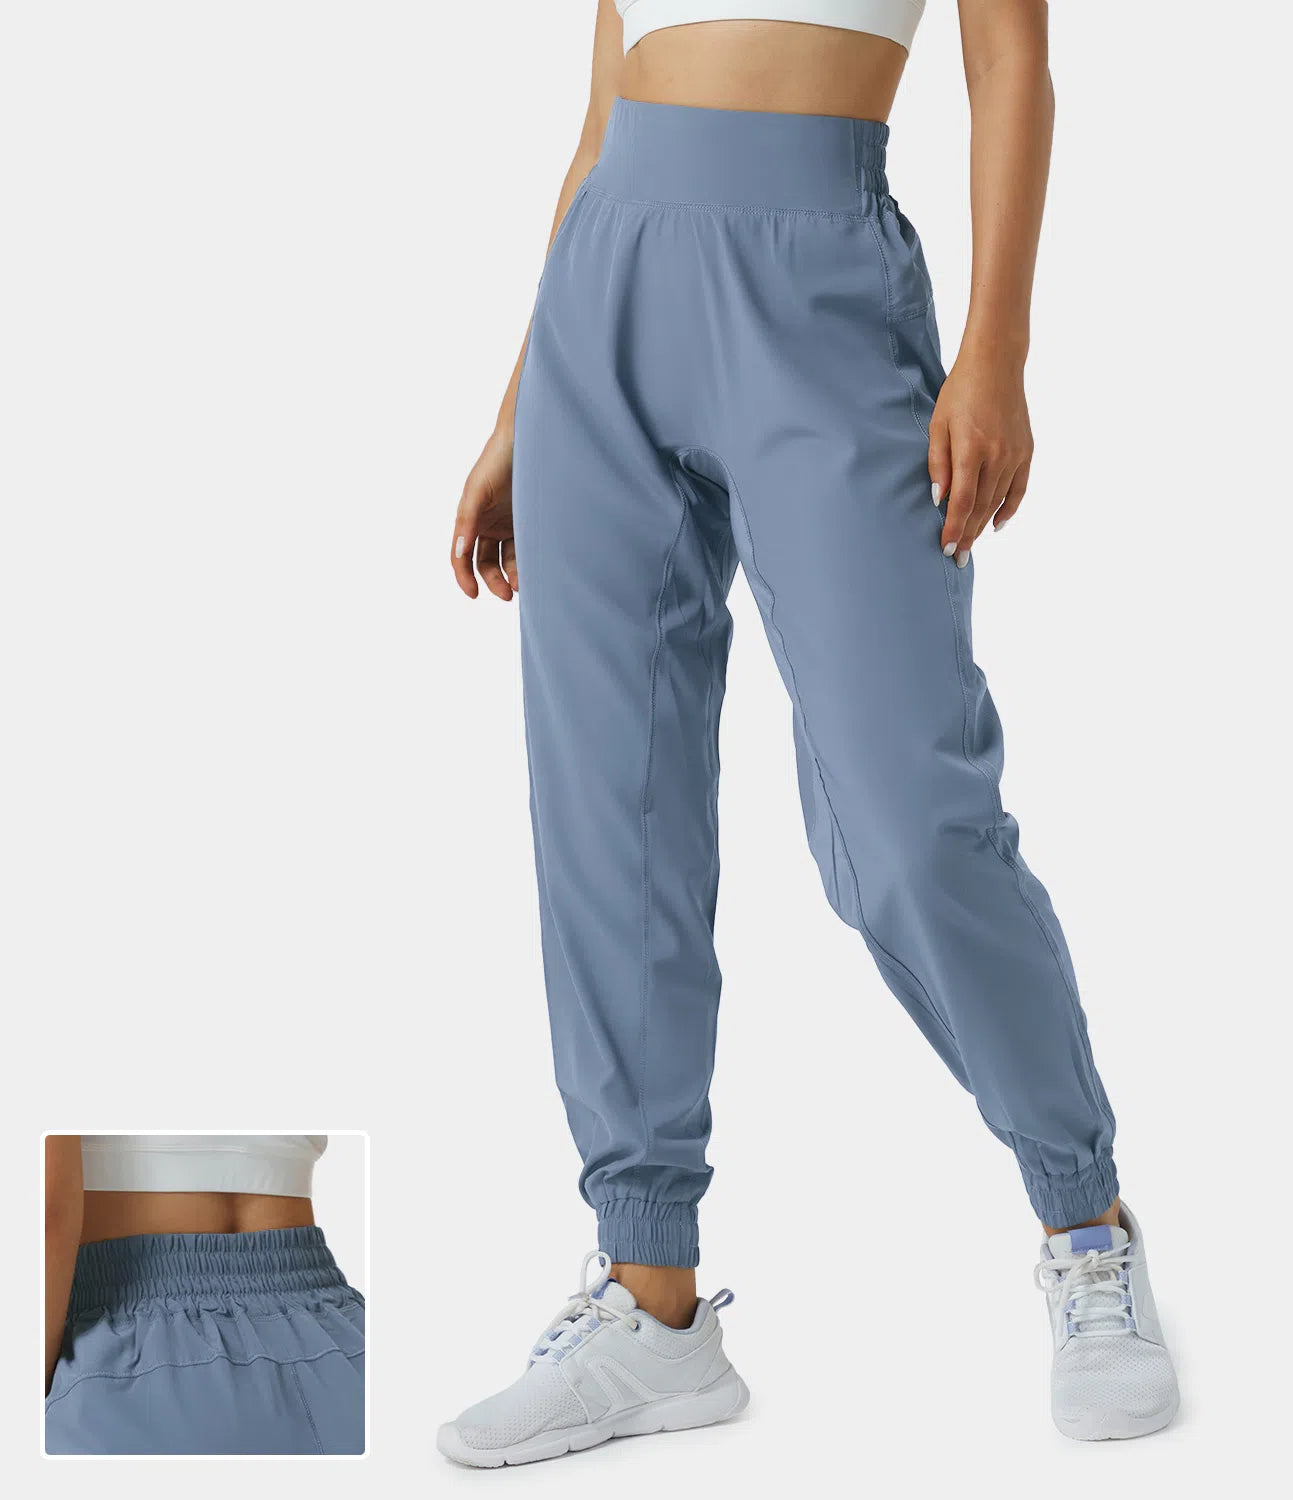 19 Petite Joggers For Women 5'3 And Under - Starting at $14